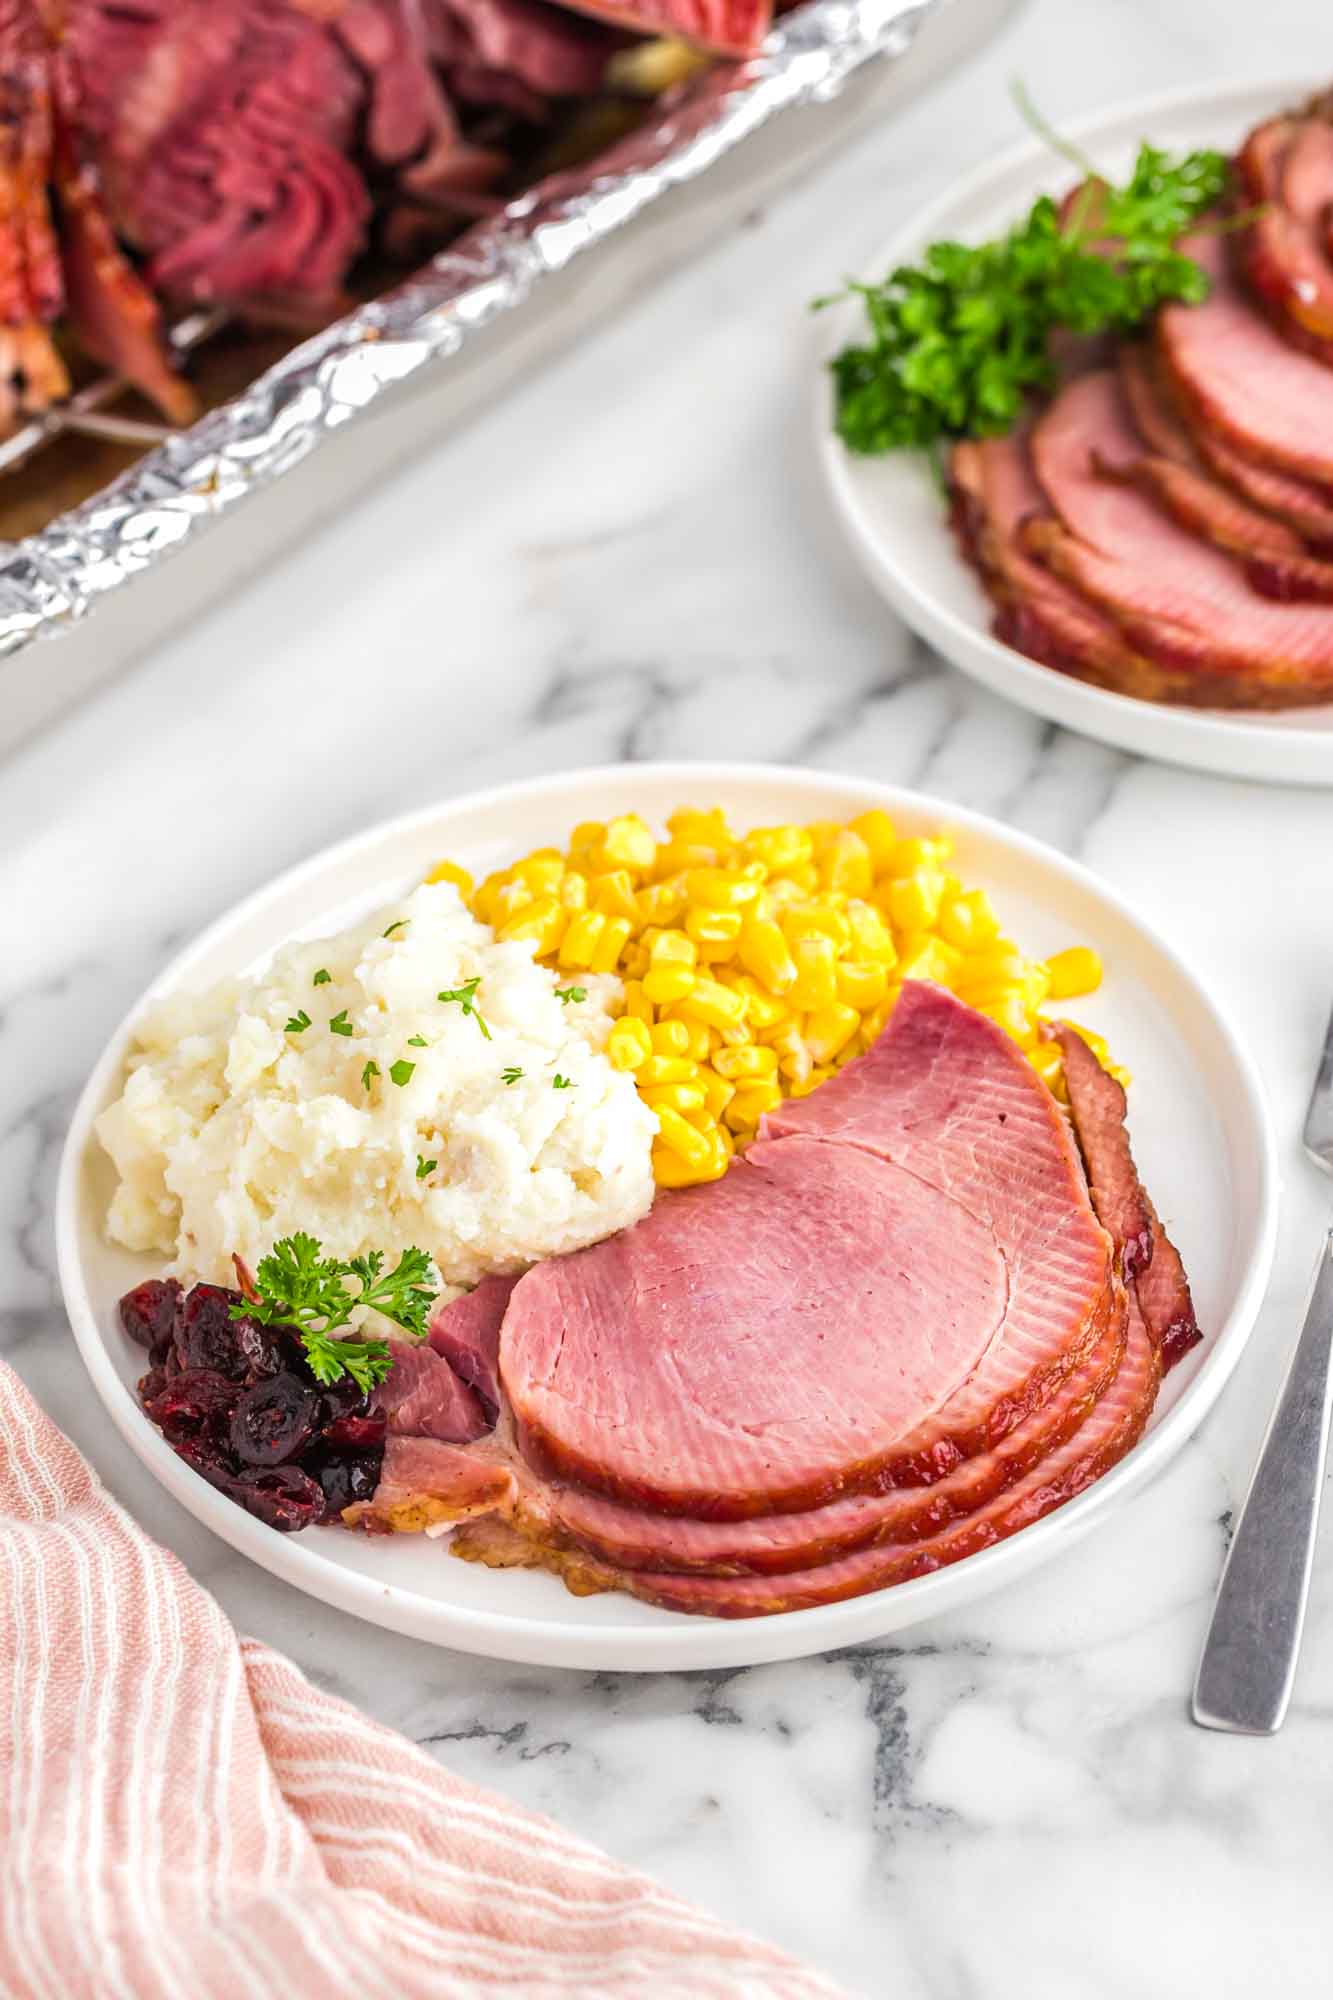 Sliced ham served on a plate with a side of mashed potatoes and corn.